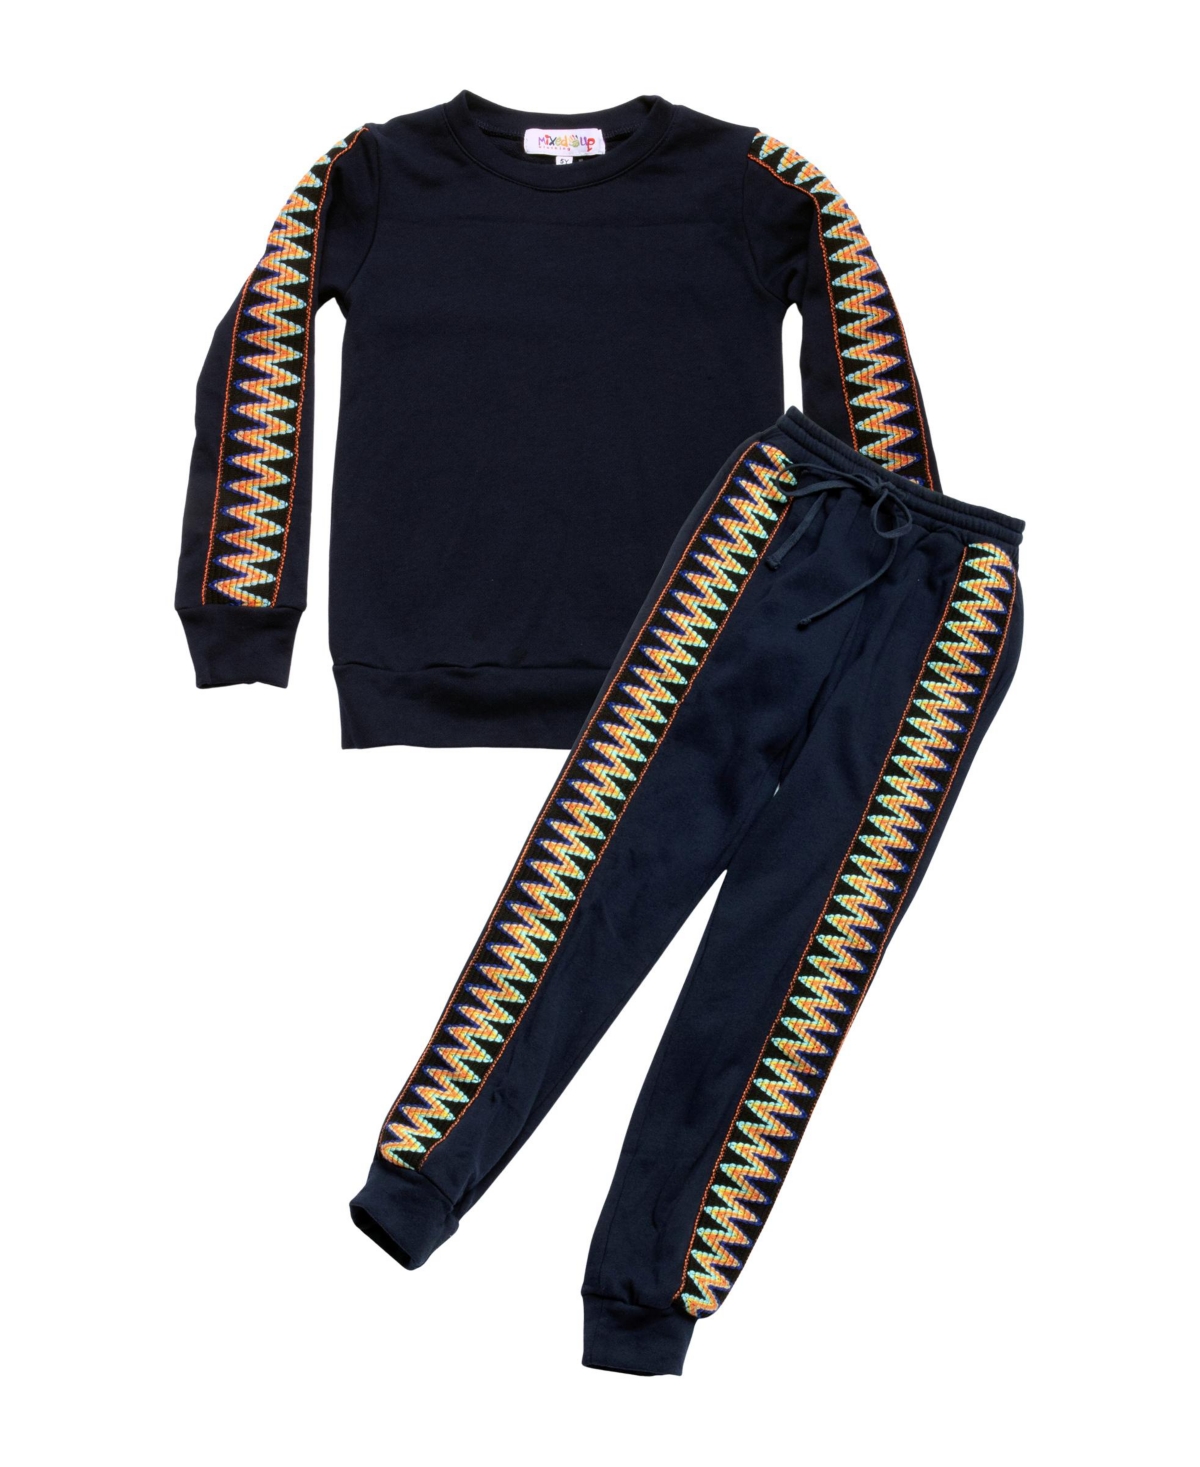 MIXED UP CLOTHING TODDLER BOYS EASY PULL-ON SWEATPANTS JOGGERS AND SWEATSHIRT